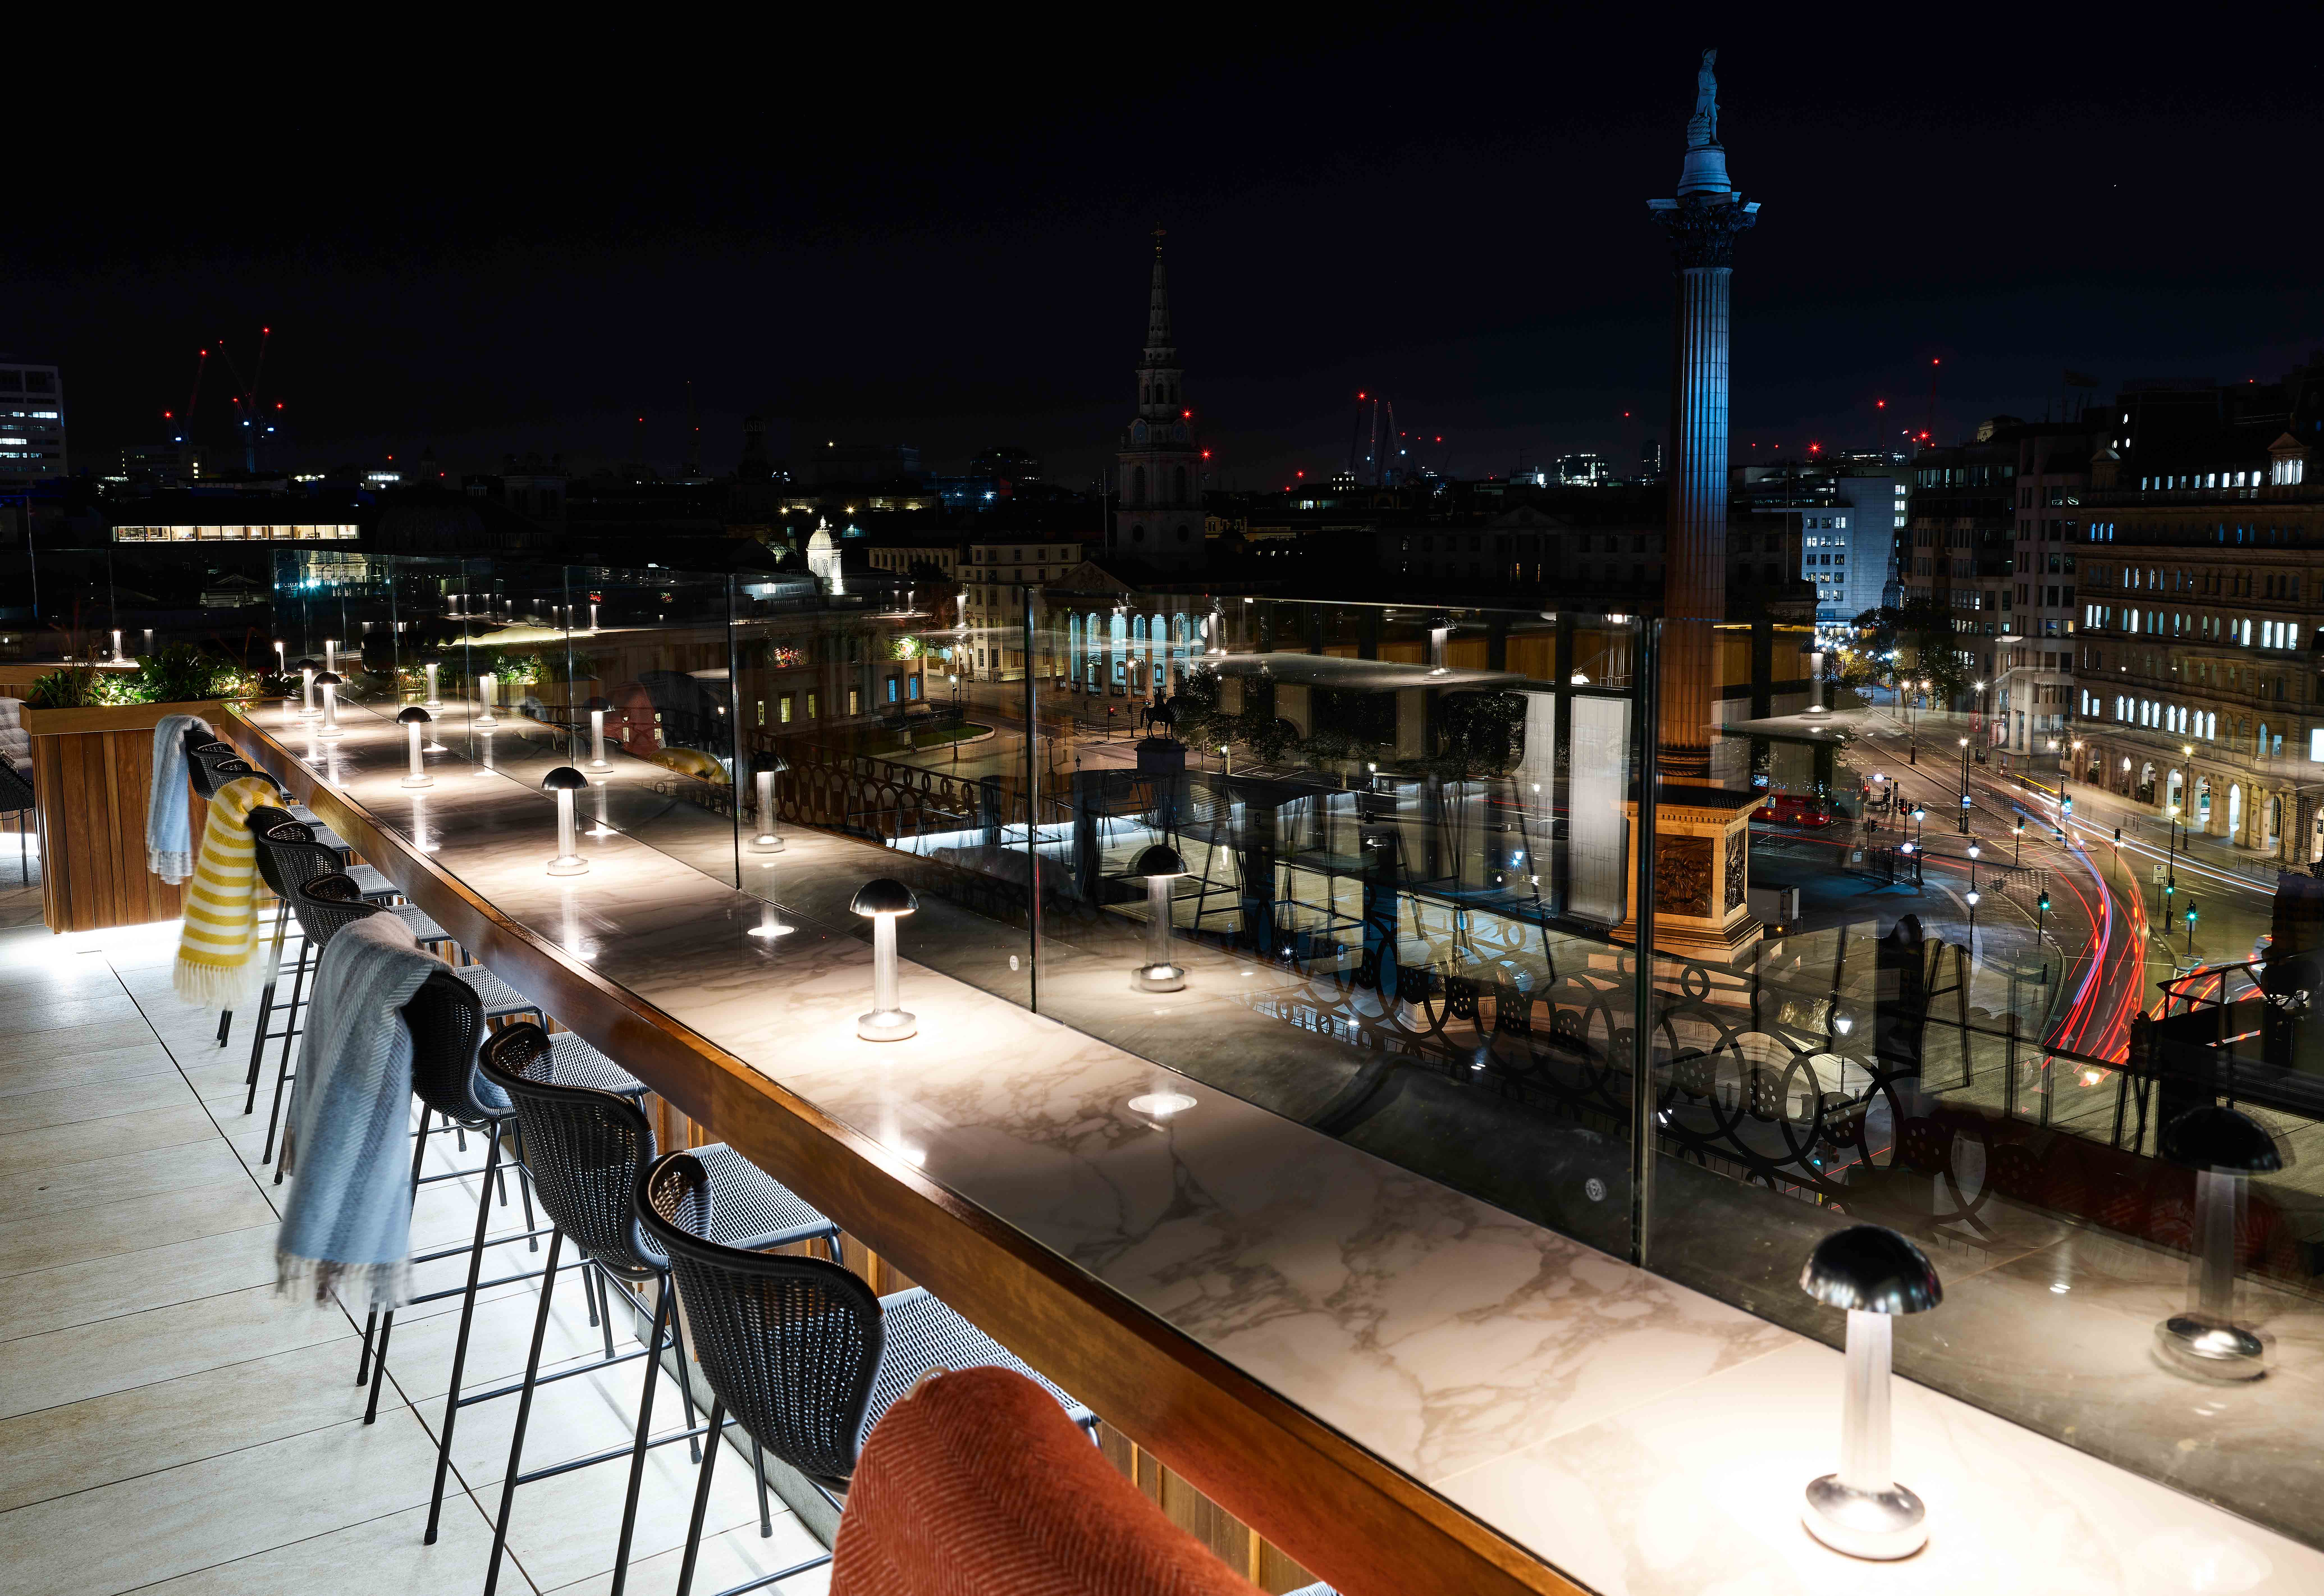 Rooftop bar with city view at night